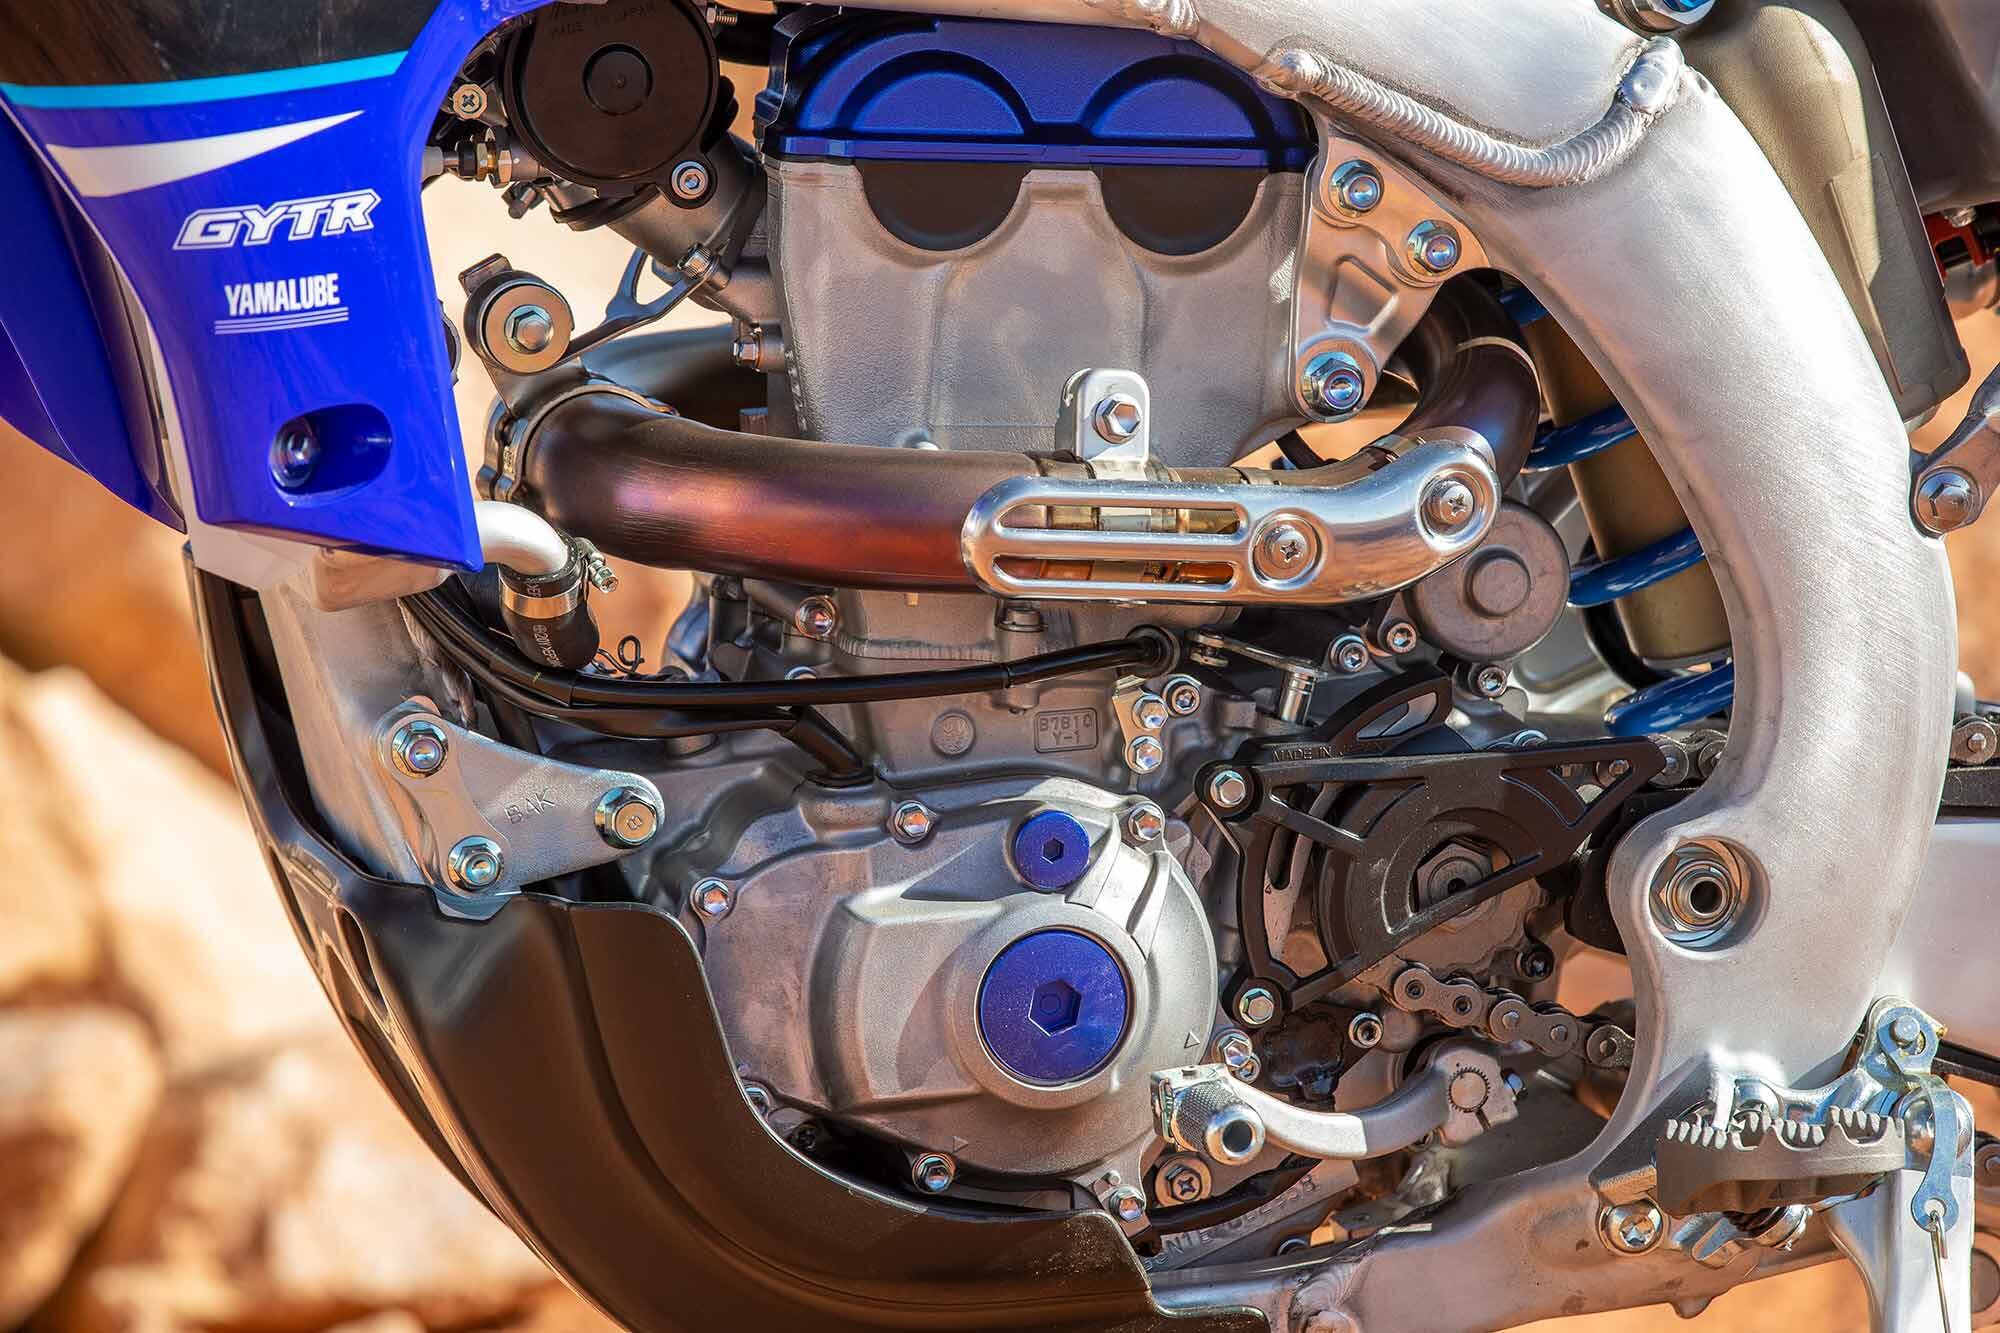 The YZ250FX has used Yamaha’s reverse cylinder head design since it was introduced in 2015. The engine configuration plays a major role in making the 250 four-stroke cross-country racer feel so powerful.